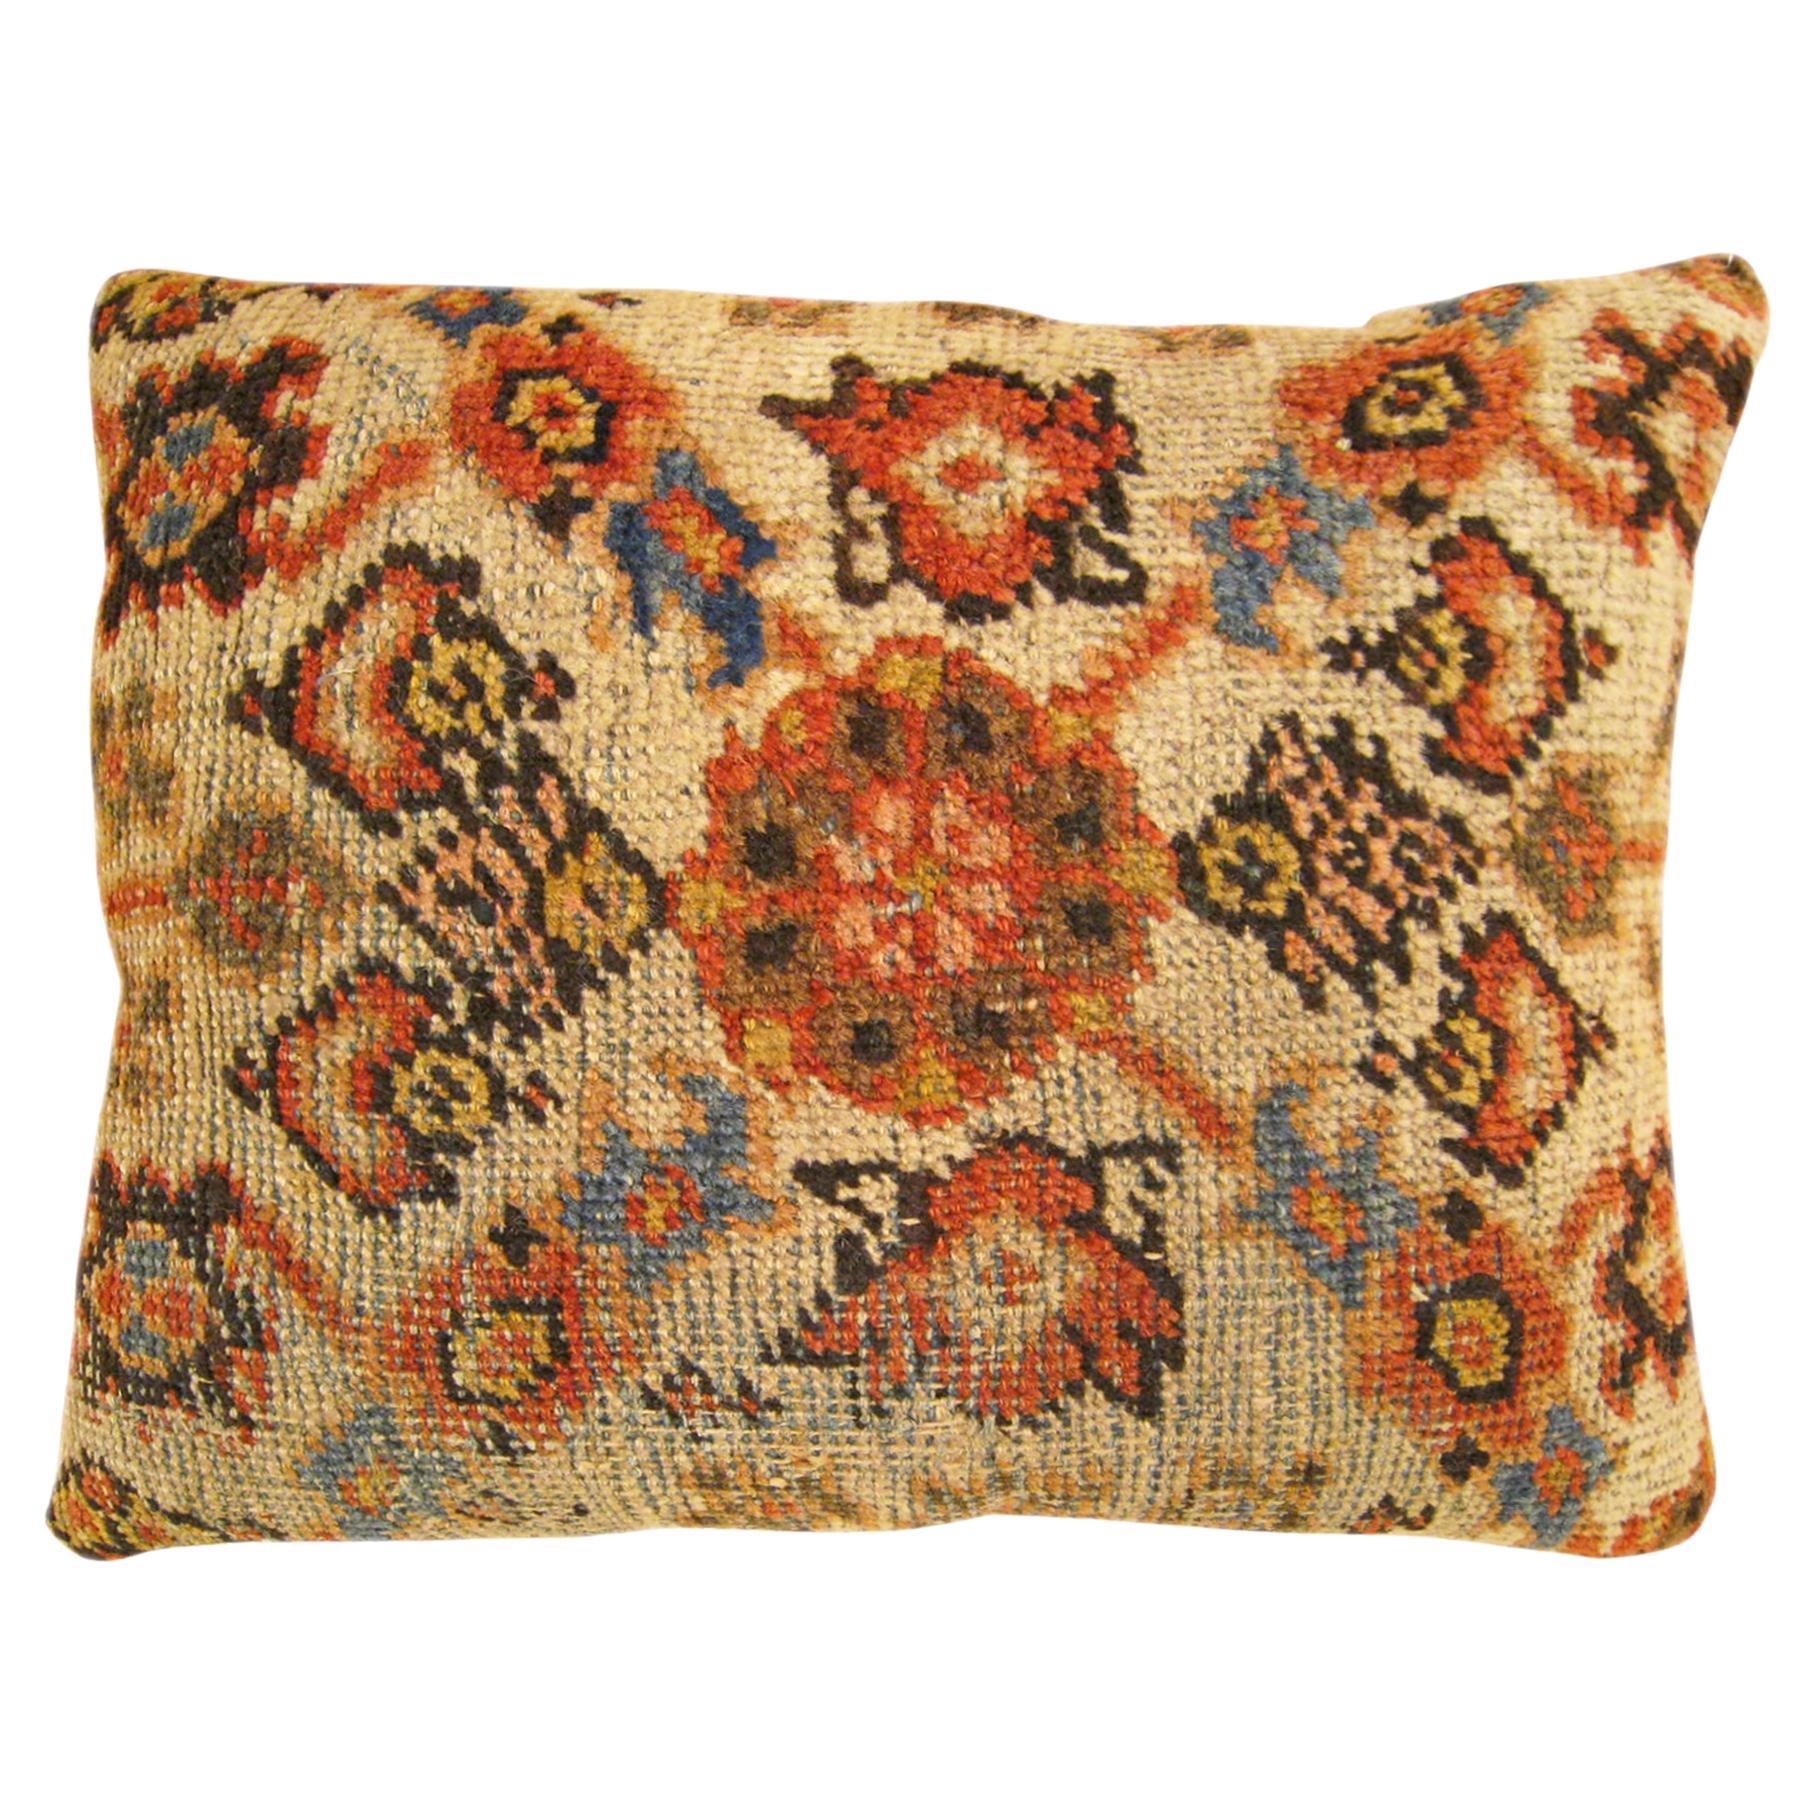  Decorative Antique Persian Sultanabad Pillow with Floral & Geometric Abstracts  For Sale